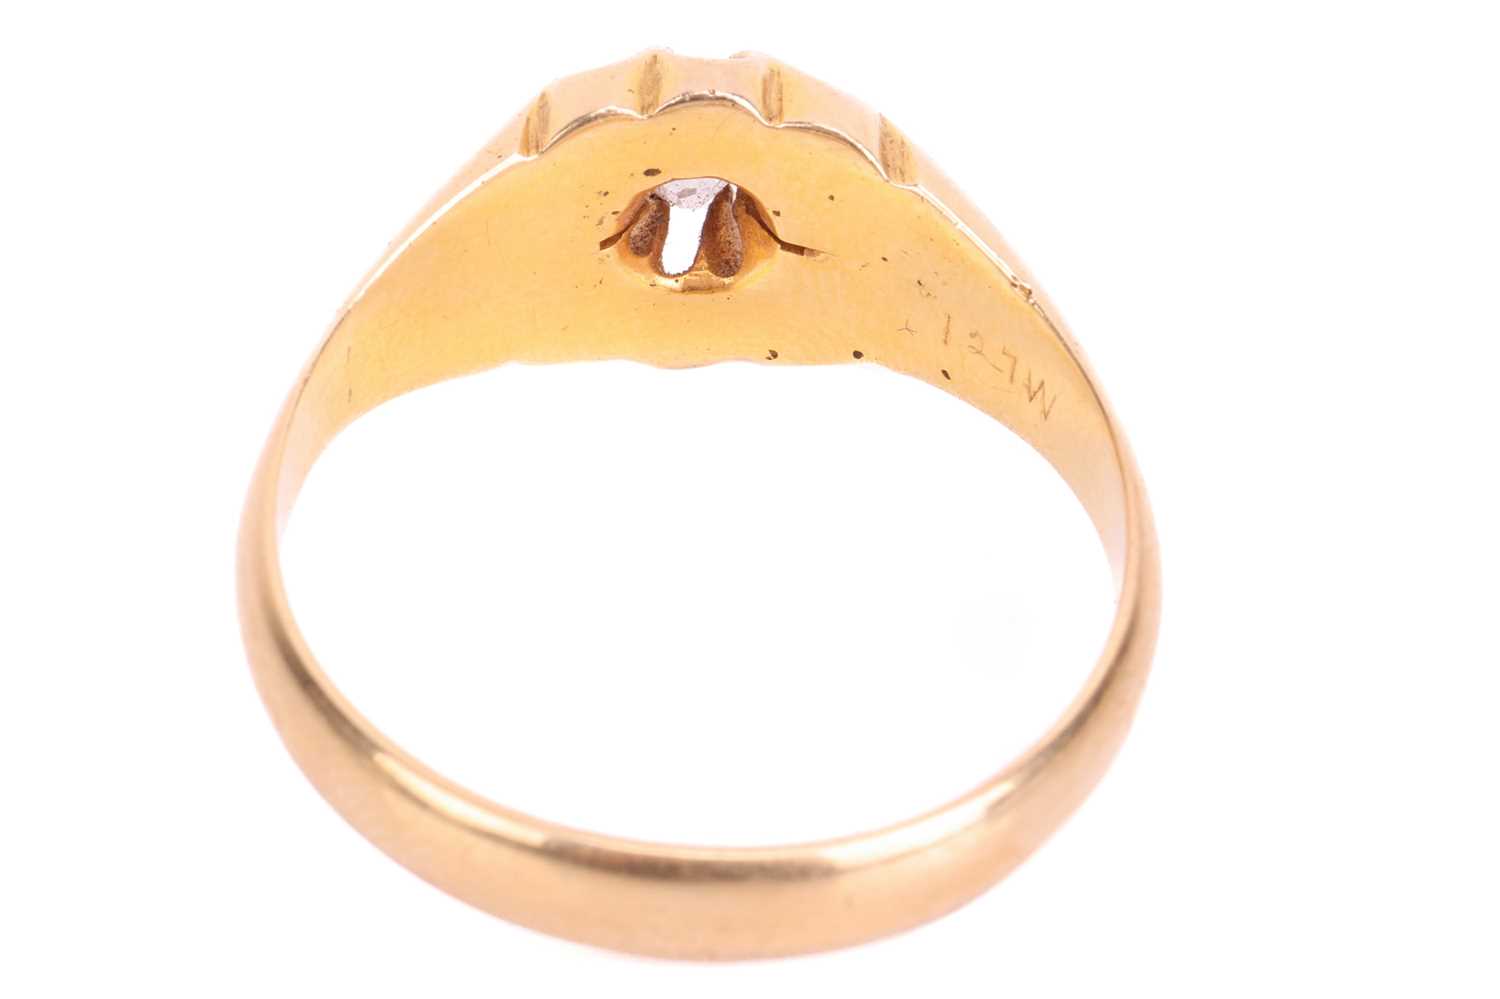 A diamond-set gypsy ring in 18ct yellow gold, centred with an oval old-cut diamond approximately mea - Image 4 of 4